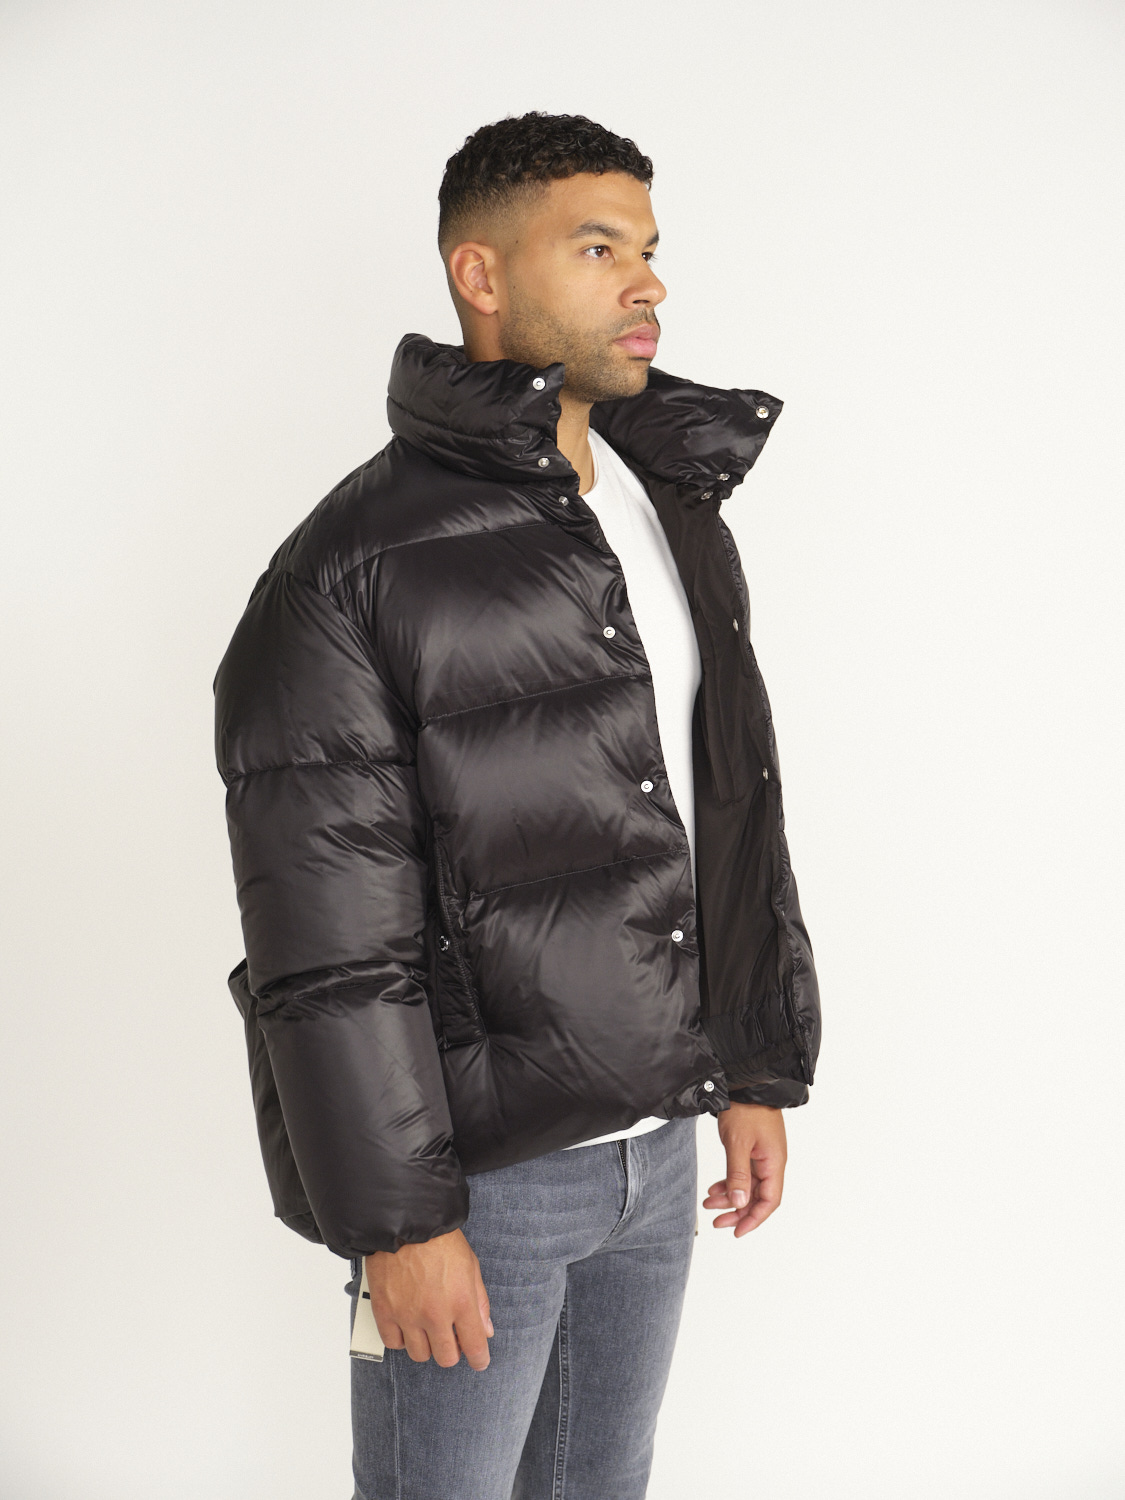 khrisjoy Bomber - Puffer jacket with button closure black S/M